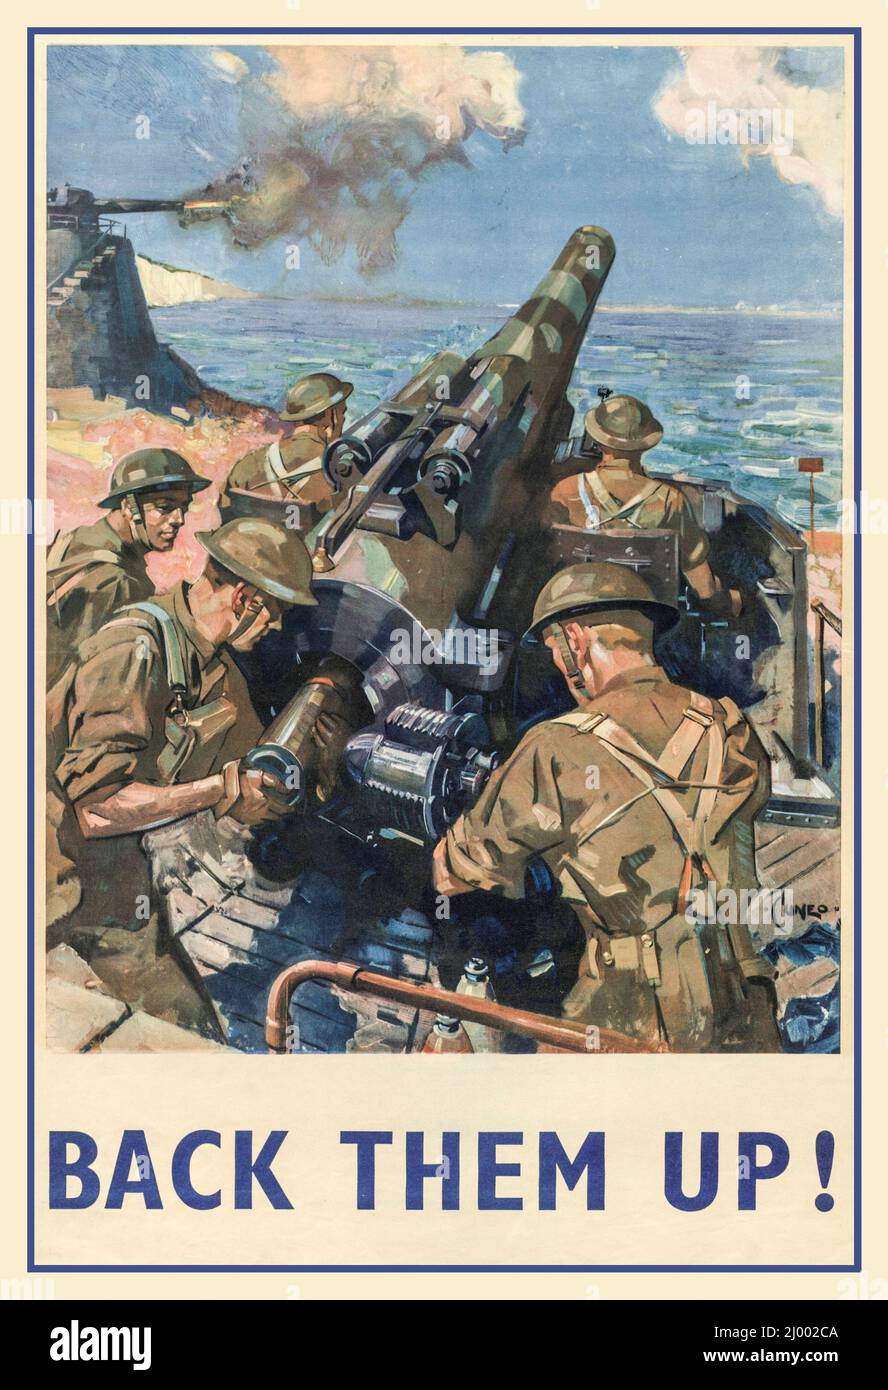 WW2 British Propaganda  'CUNEO' Poster illustrating defence gunnery battery's on the south coast of England with white cliffs of Dover in background. From a series of British propaganda posters titiled  'Back Them Up'  Second World War World War 2 Stock Photo